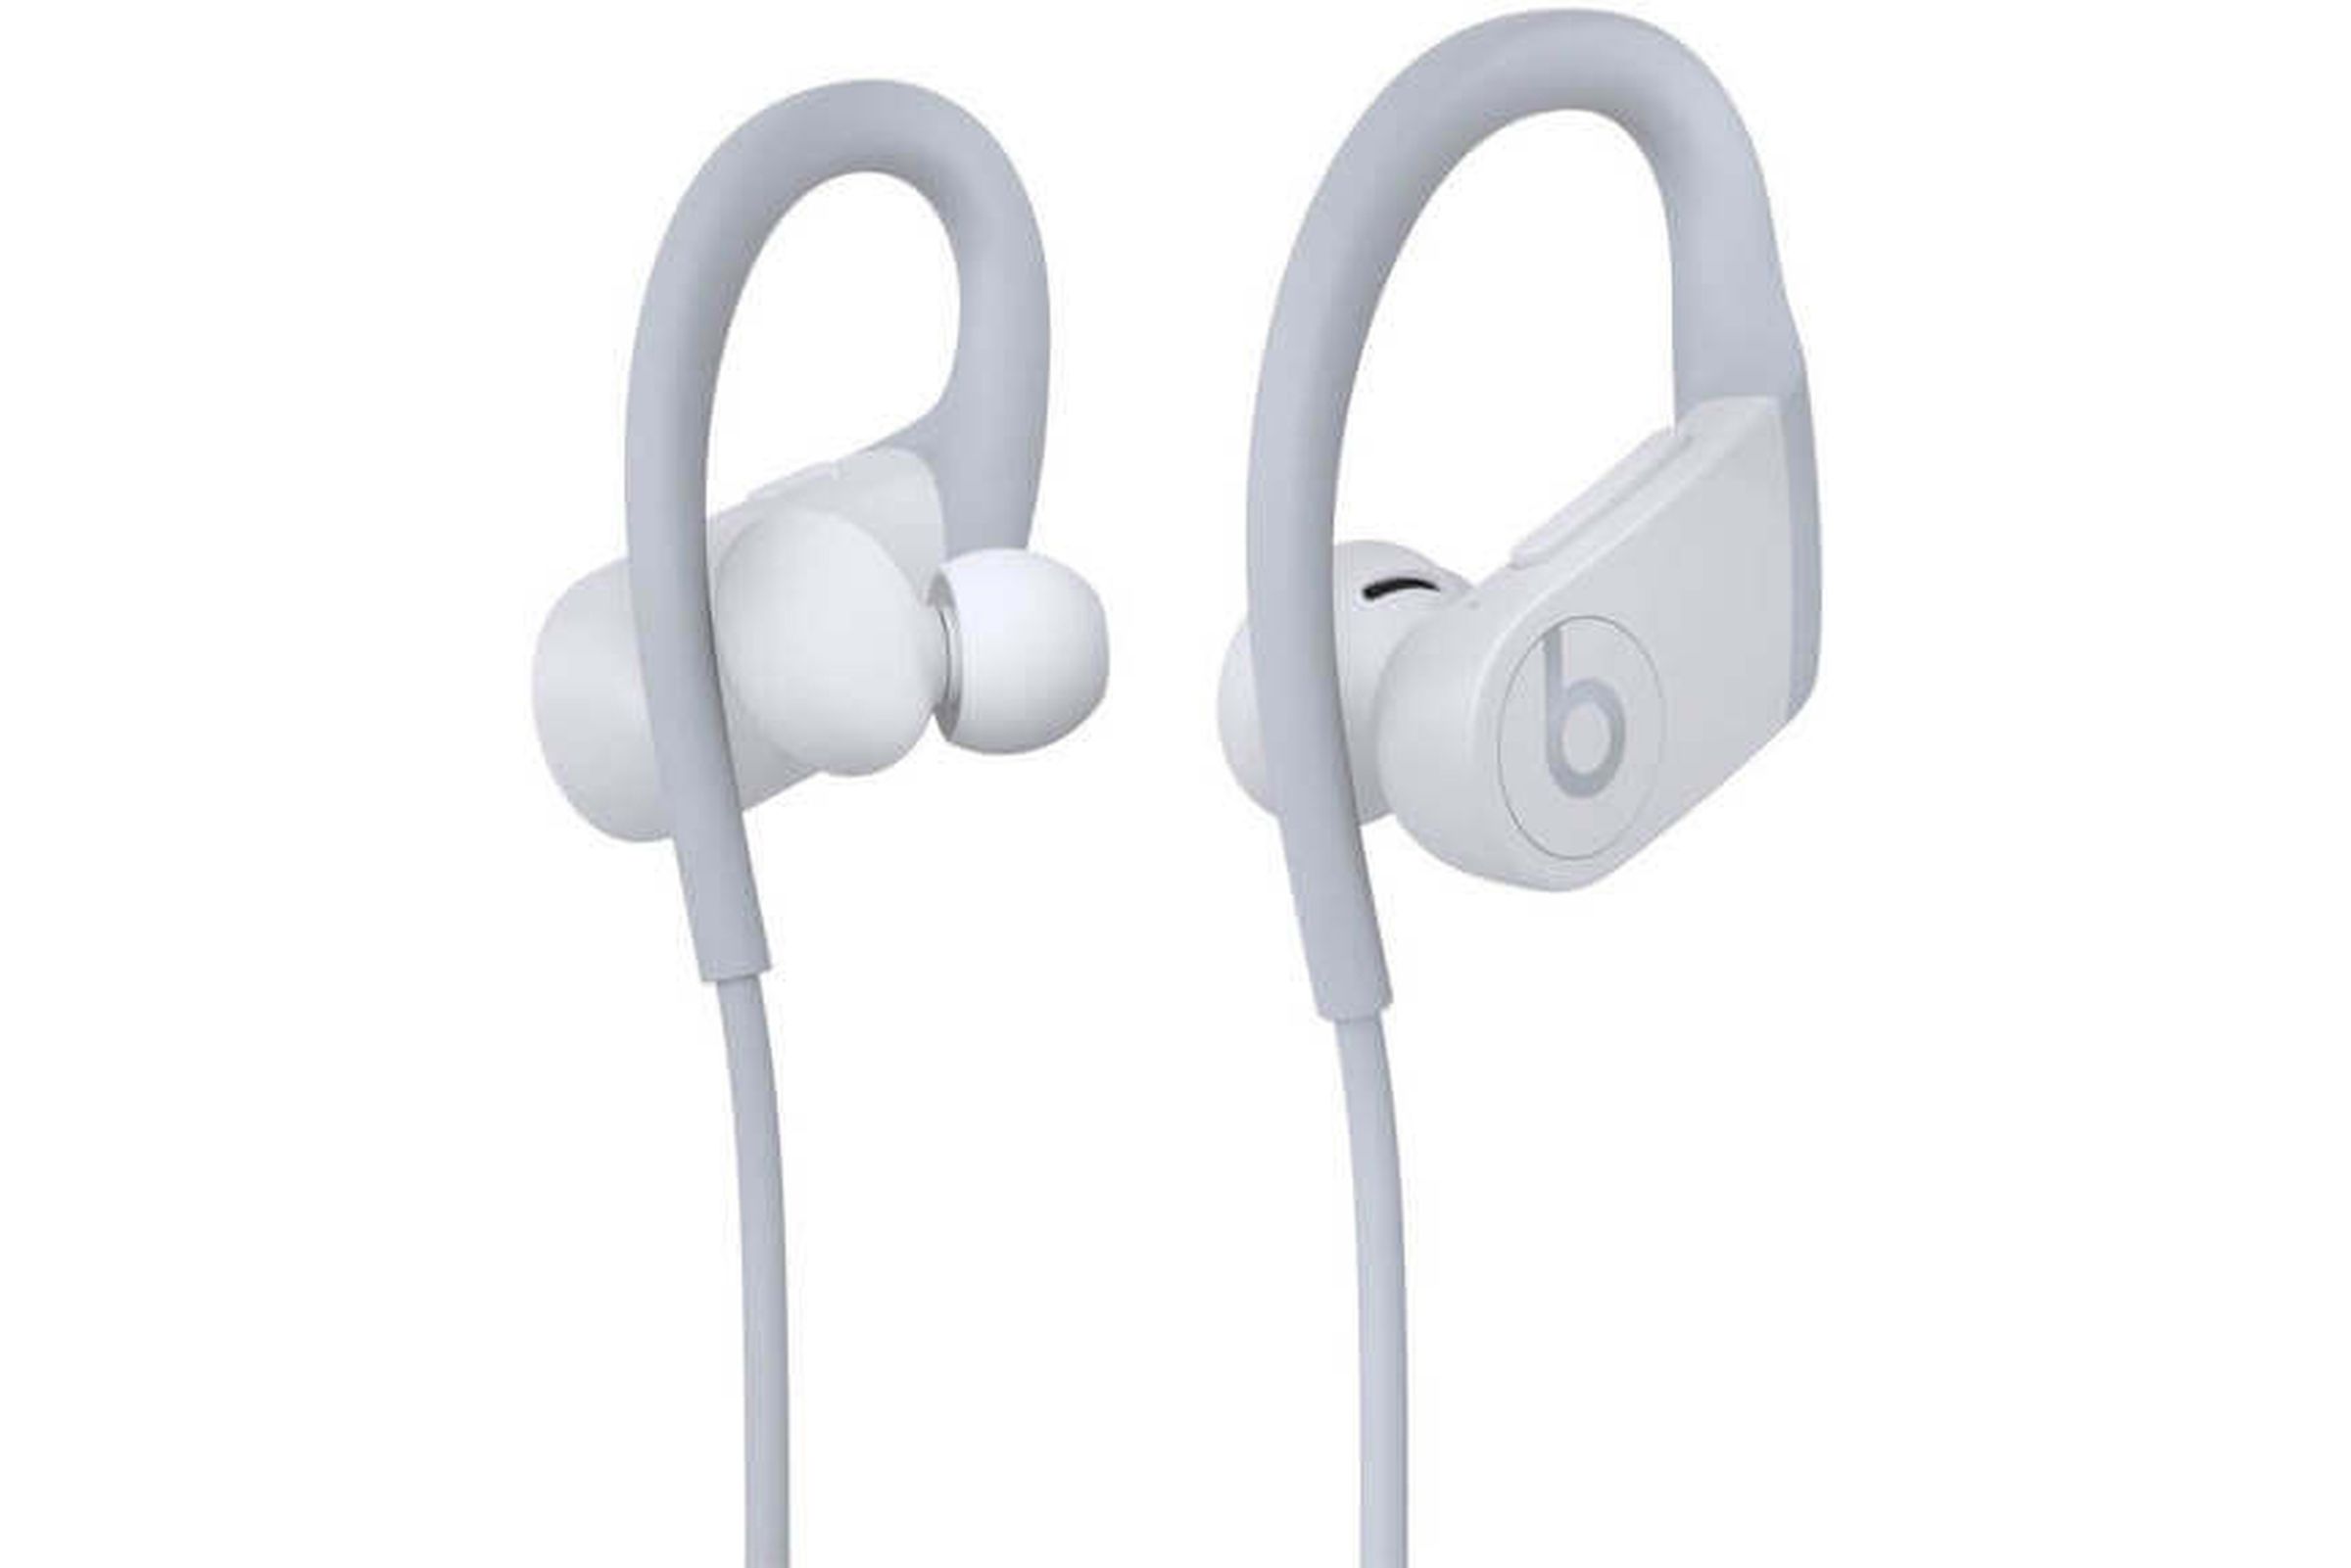 Internally, the earbuds are said to be using Apple’s new H1 chip.